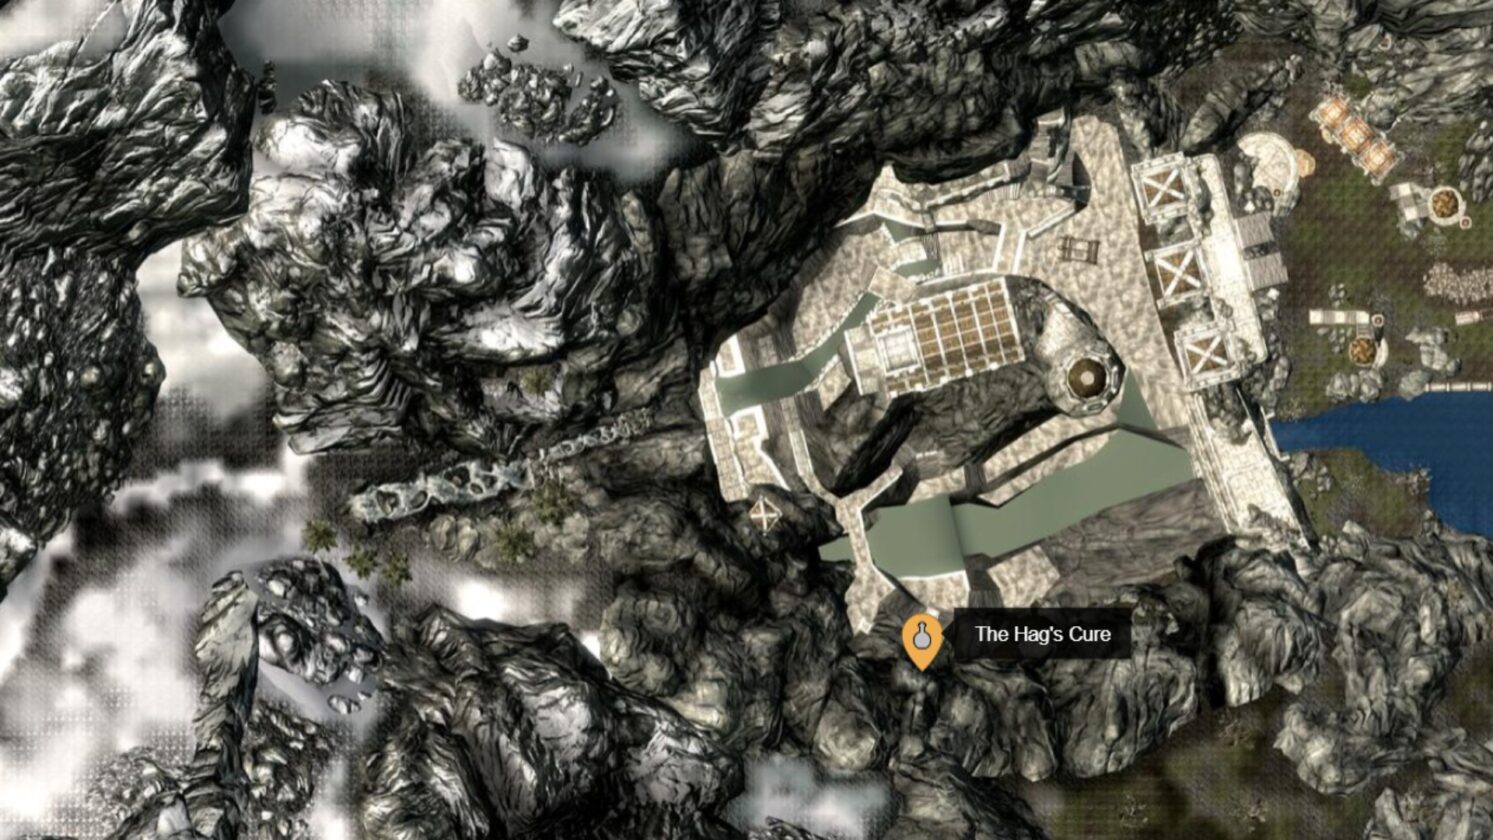 The hag's cure location